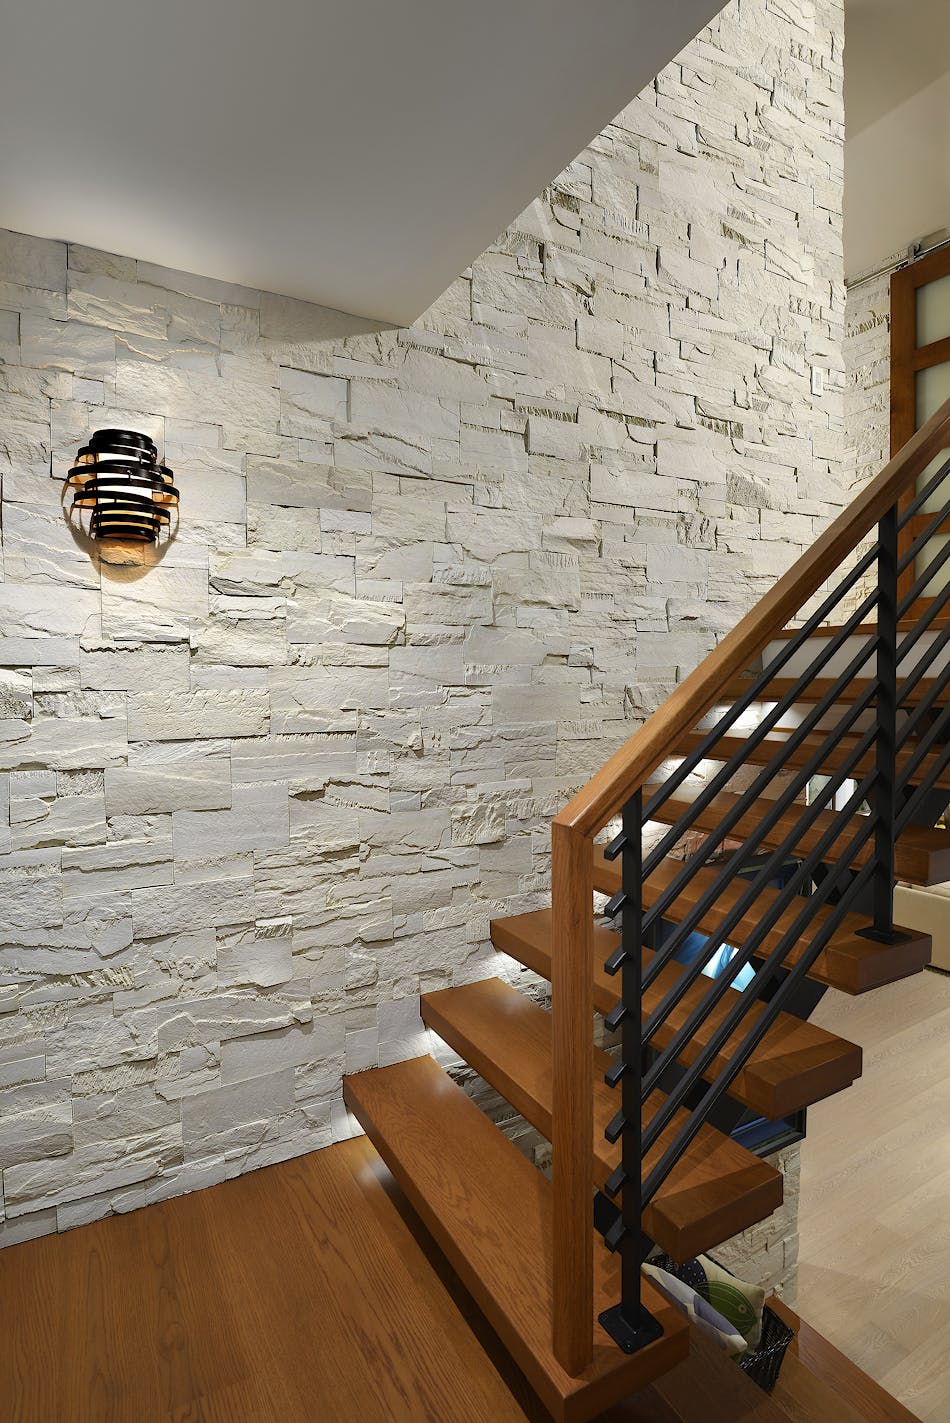 A staircase features white stone veneer on the wall. There are wooden steps leading to the upstairs of the home.